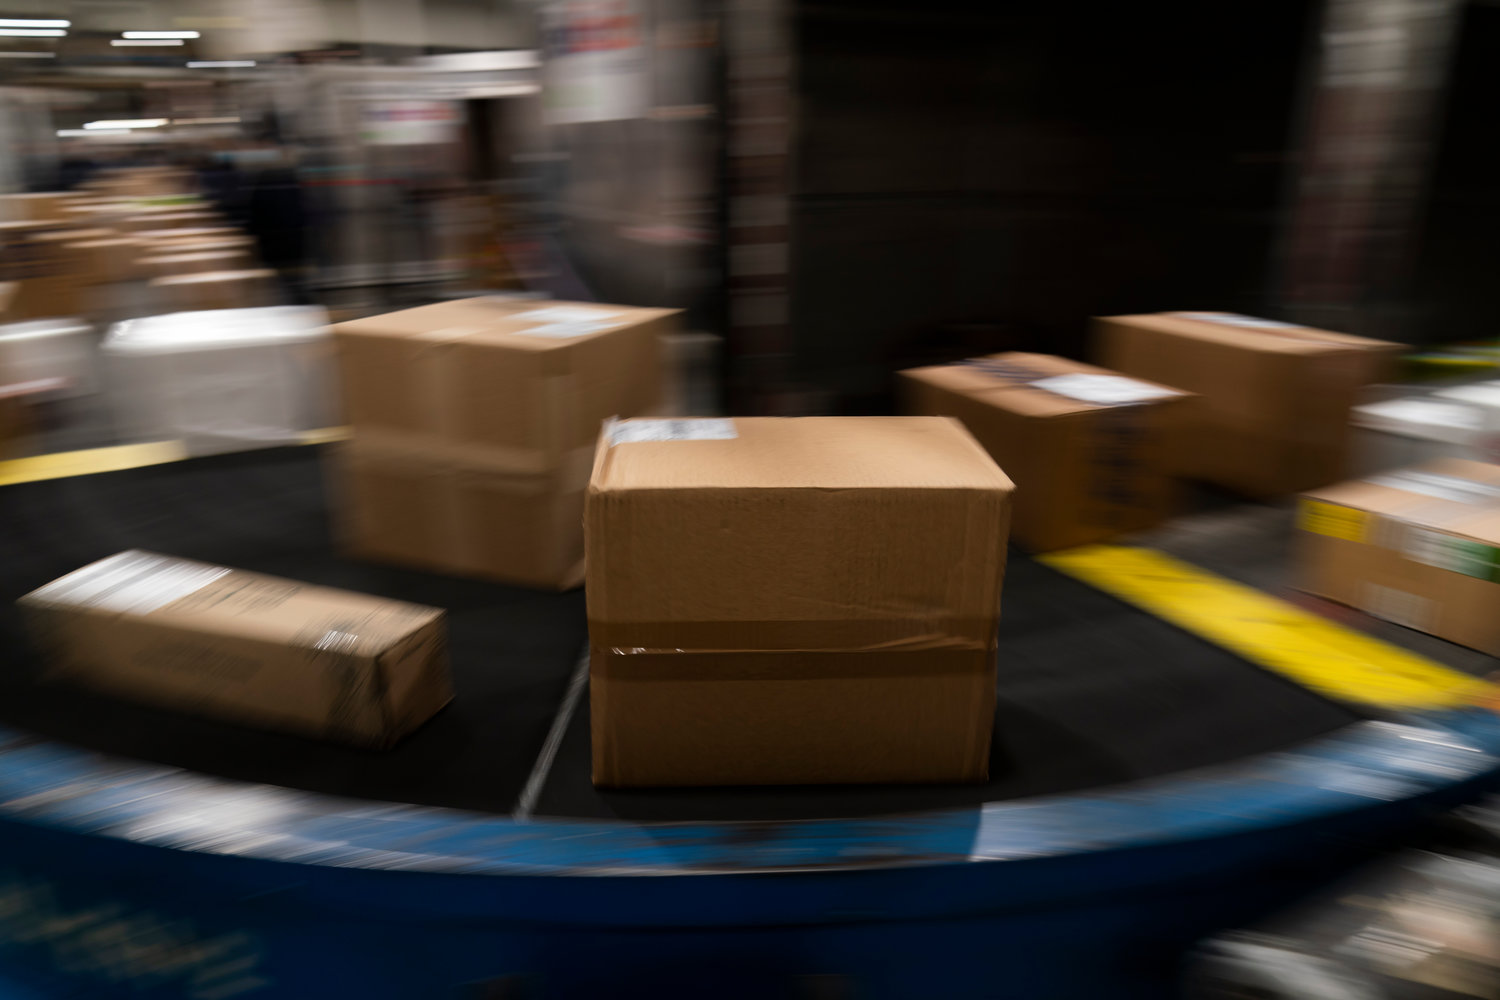 Packages move along a conveyor belt while being sorted for delivery at the FedEx regional hub at the Los Angeles International Airport in Los Angeles in this 2021 file photo.